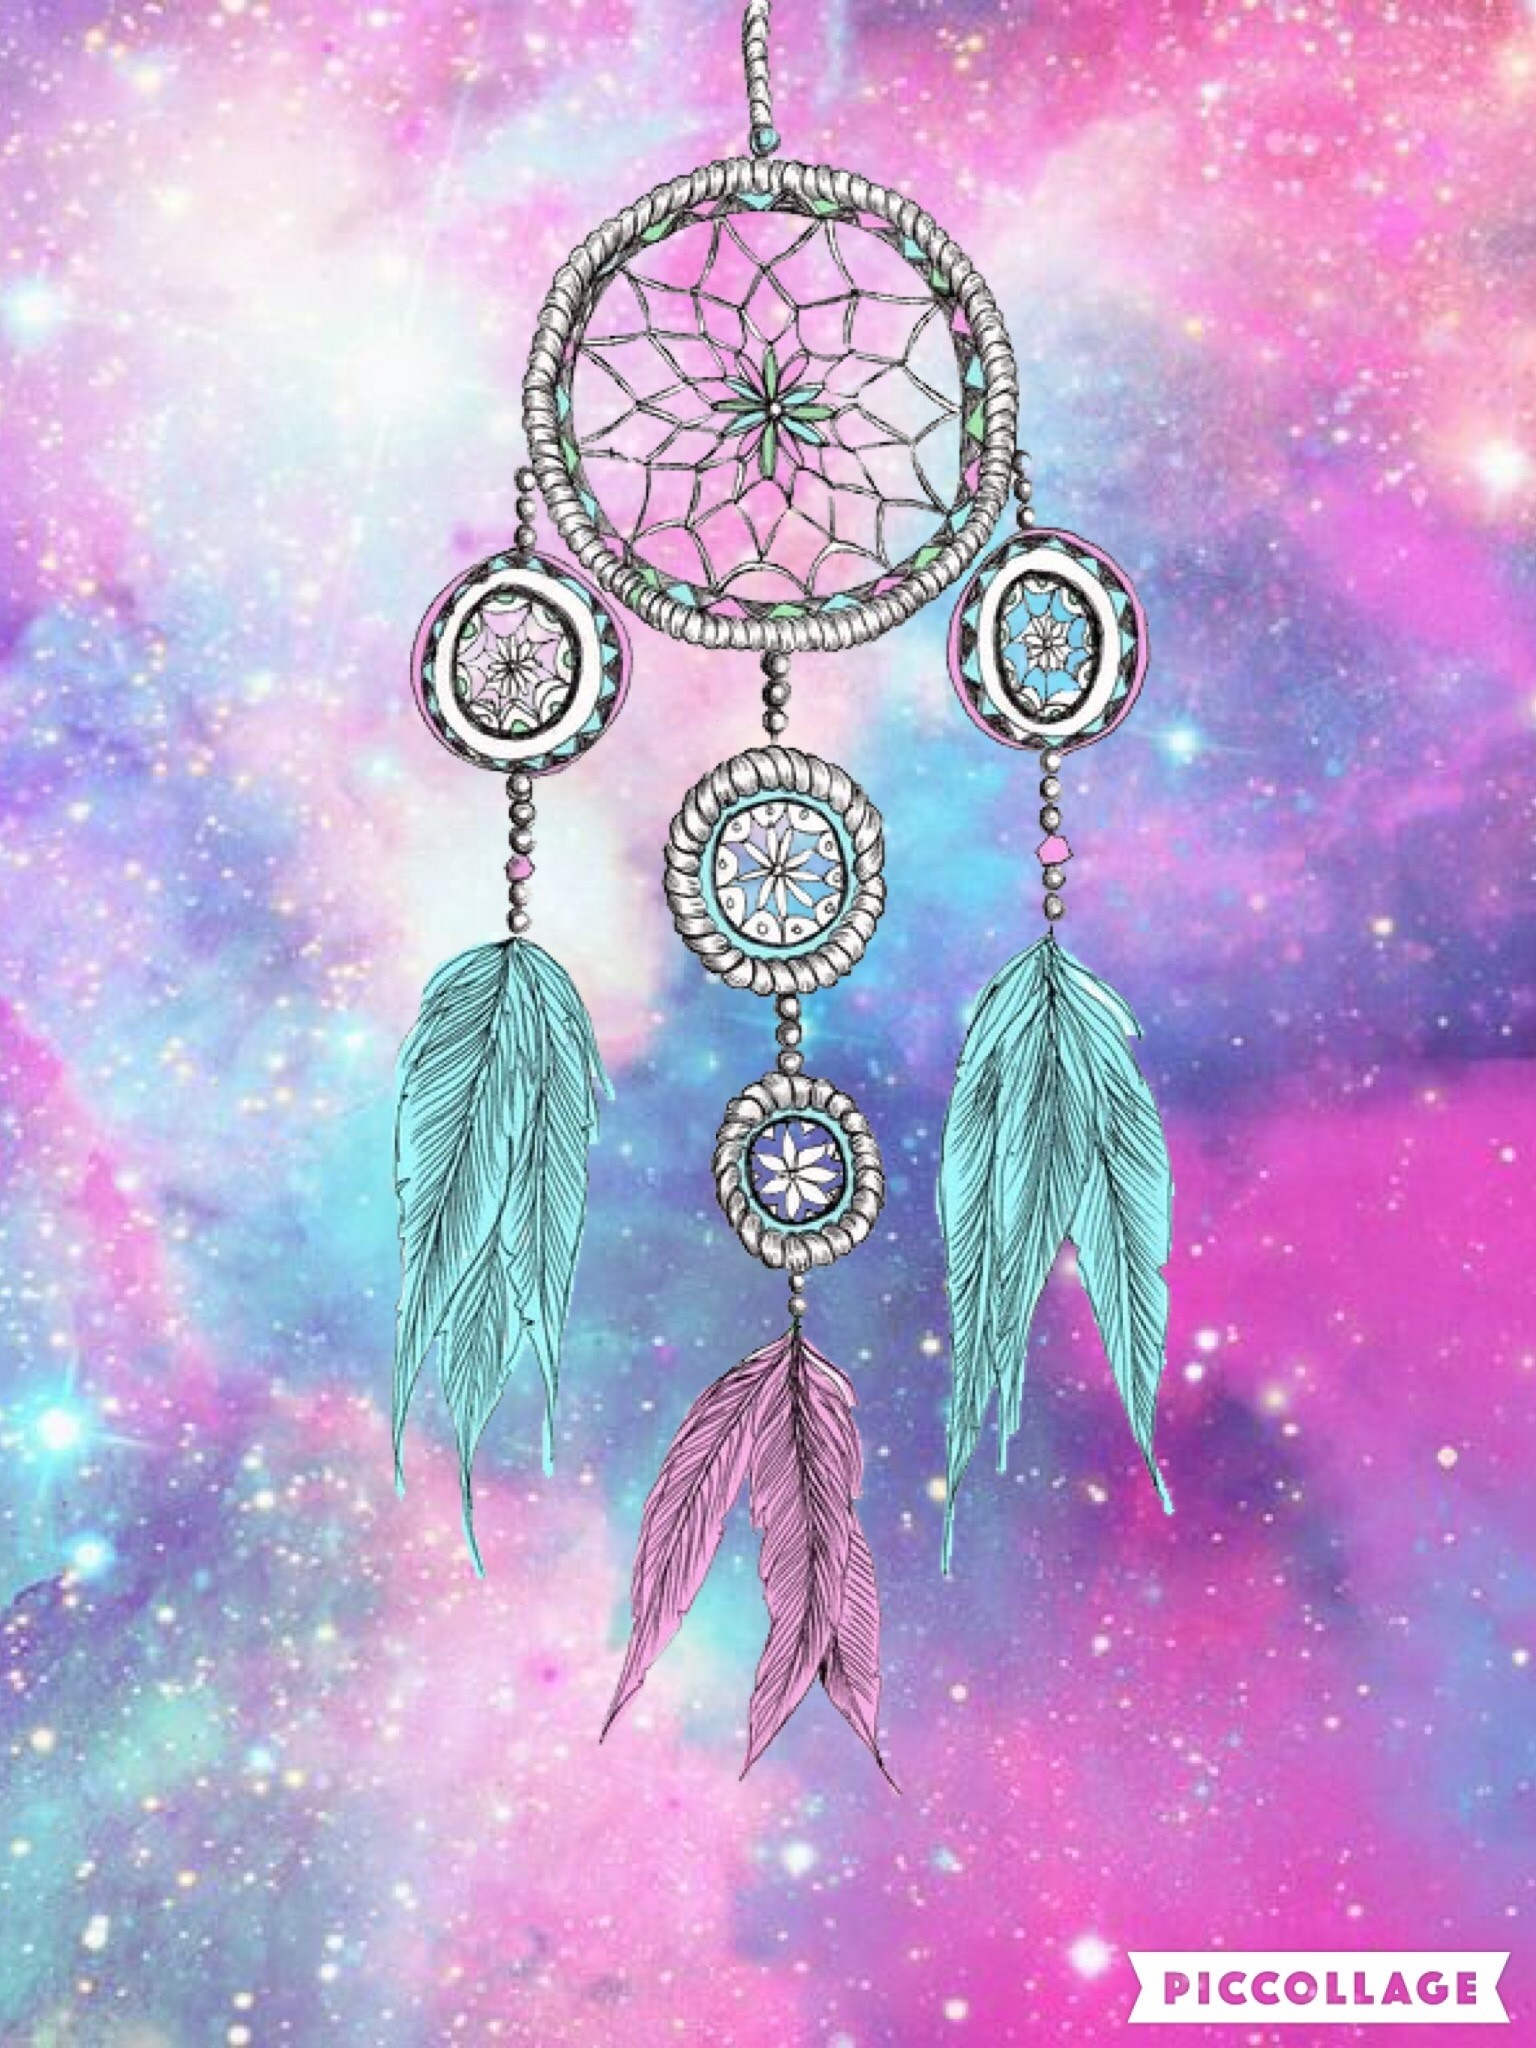 1536x2048, 10 New Dreamcatcher Wallpaper For Android - Dreamcatcher Wallpaper Hd - HD Wallpaper 